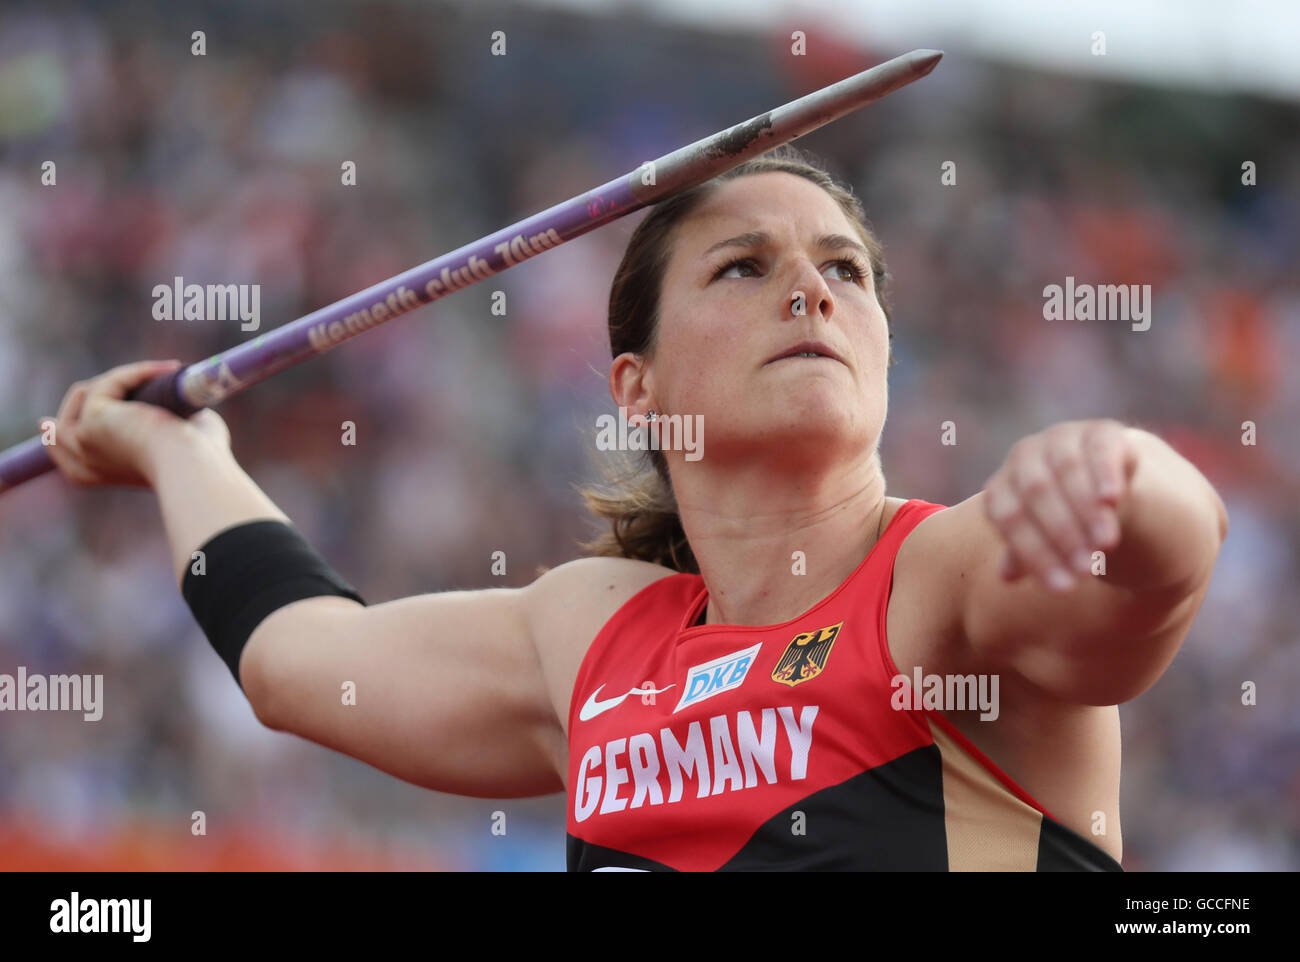 Amsterdam, The Netherlands. 9th July, 2016. Germany's Linda Stahl competes in the women's Javelin Throw final at the European Athletics Championships at the Olympic Stadium in Amsterdam, The Netherlands, 09 July 2016. Photo: Michael Kappeler/dpa/Alamy Live News Stock Photo